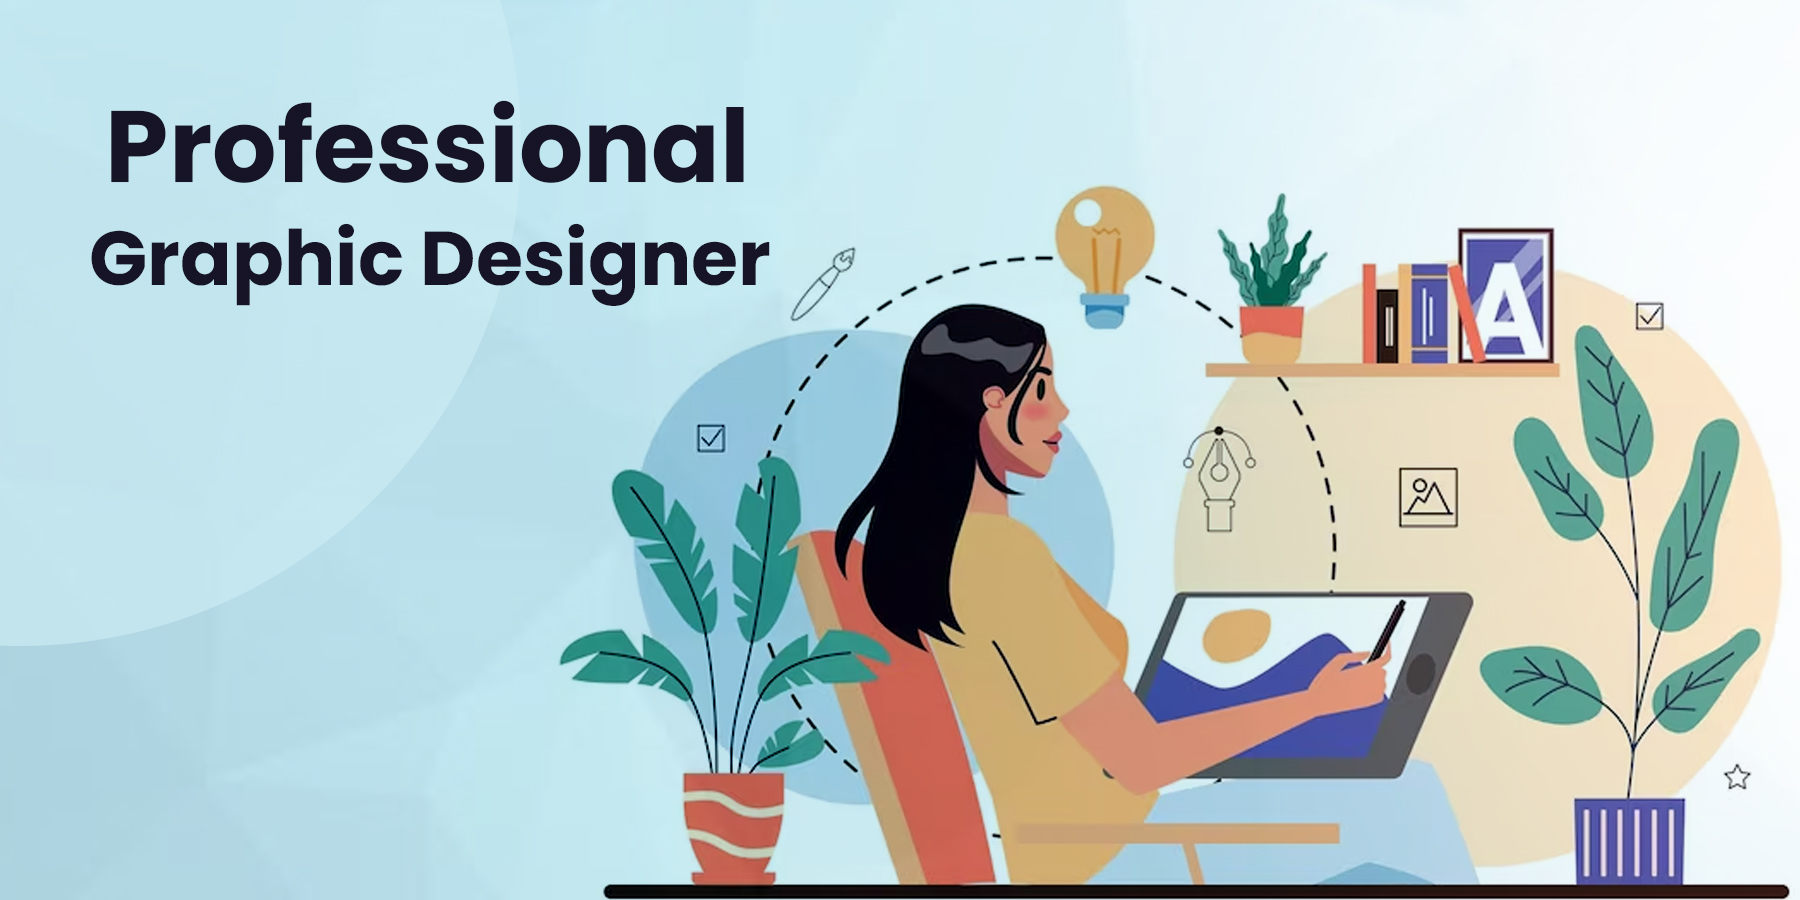 Hiring for Professional Graphic Designers: Major Skills & Technologies to Look For!